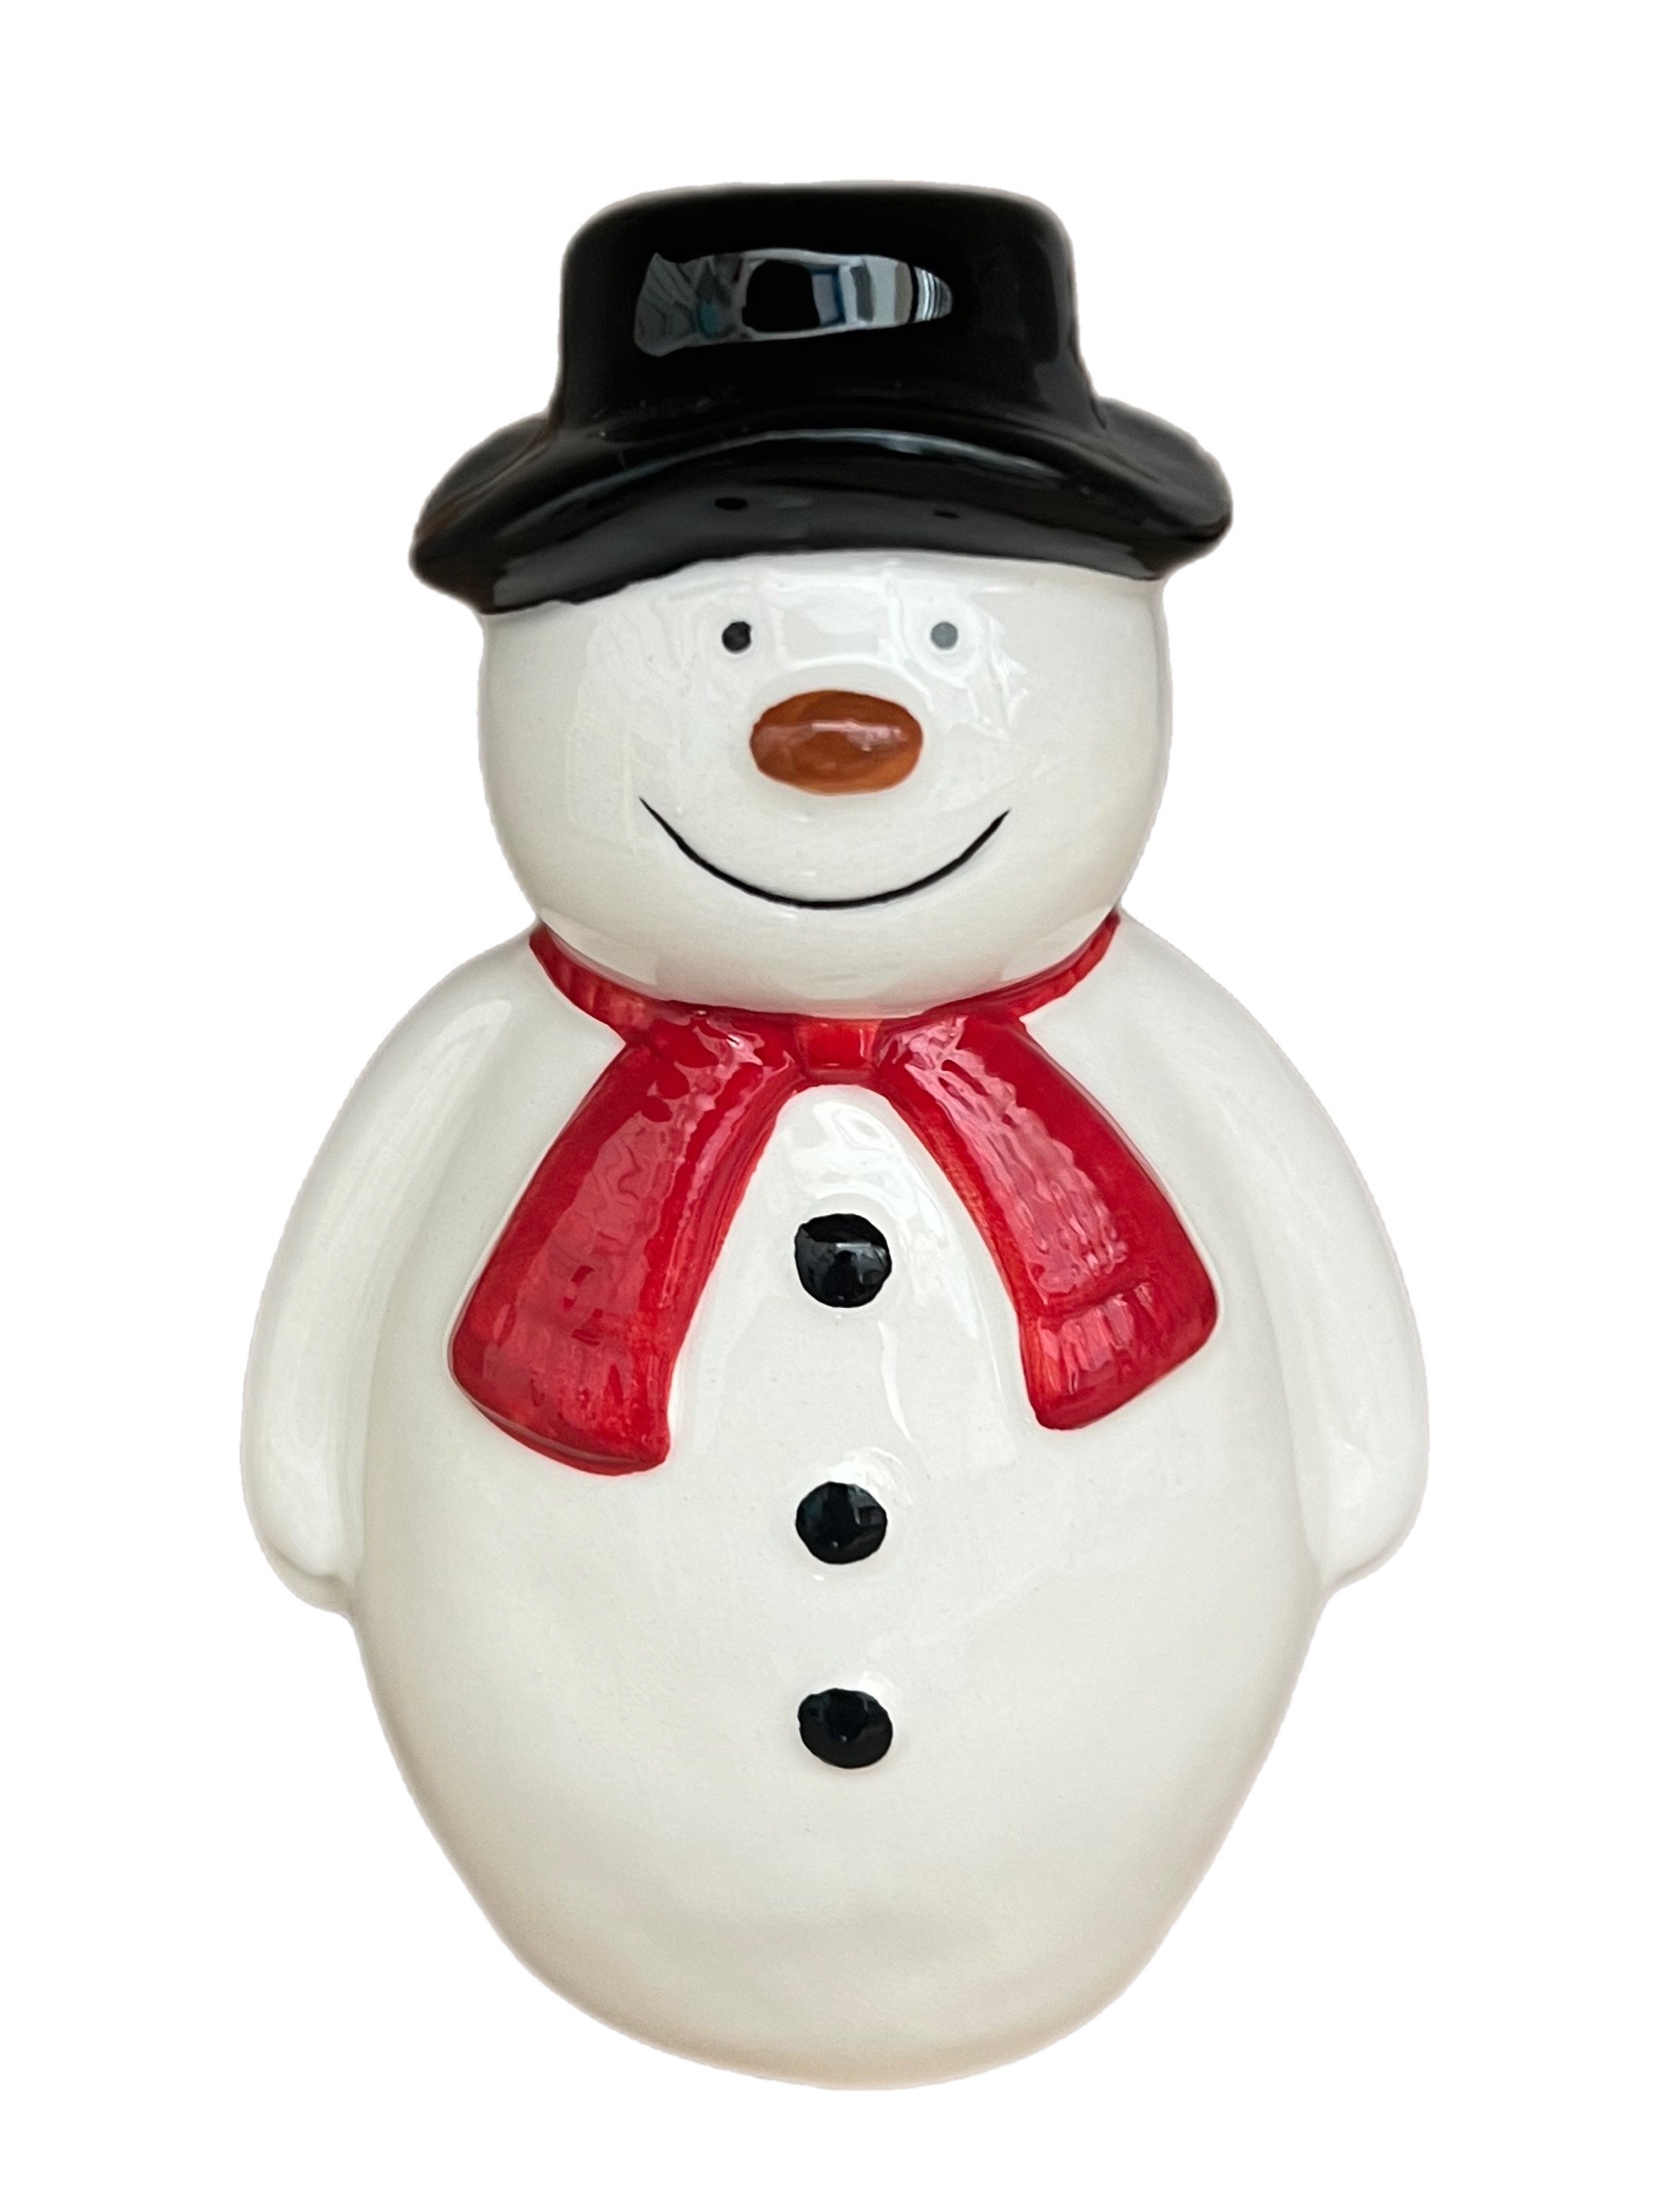 Ceramic Decorative Snowman Ornament Wearing a Traditional Hat and Red Scarf